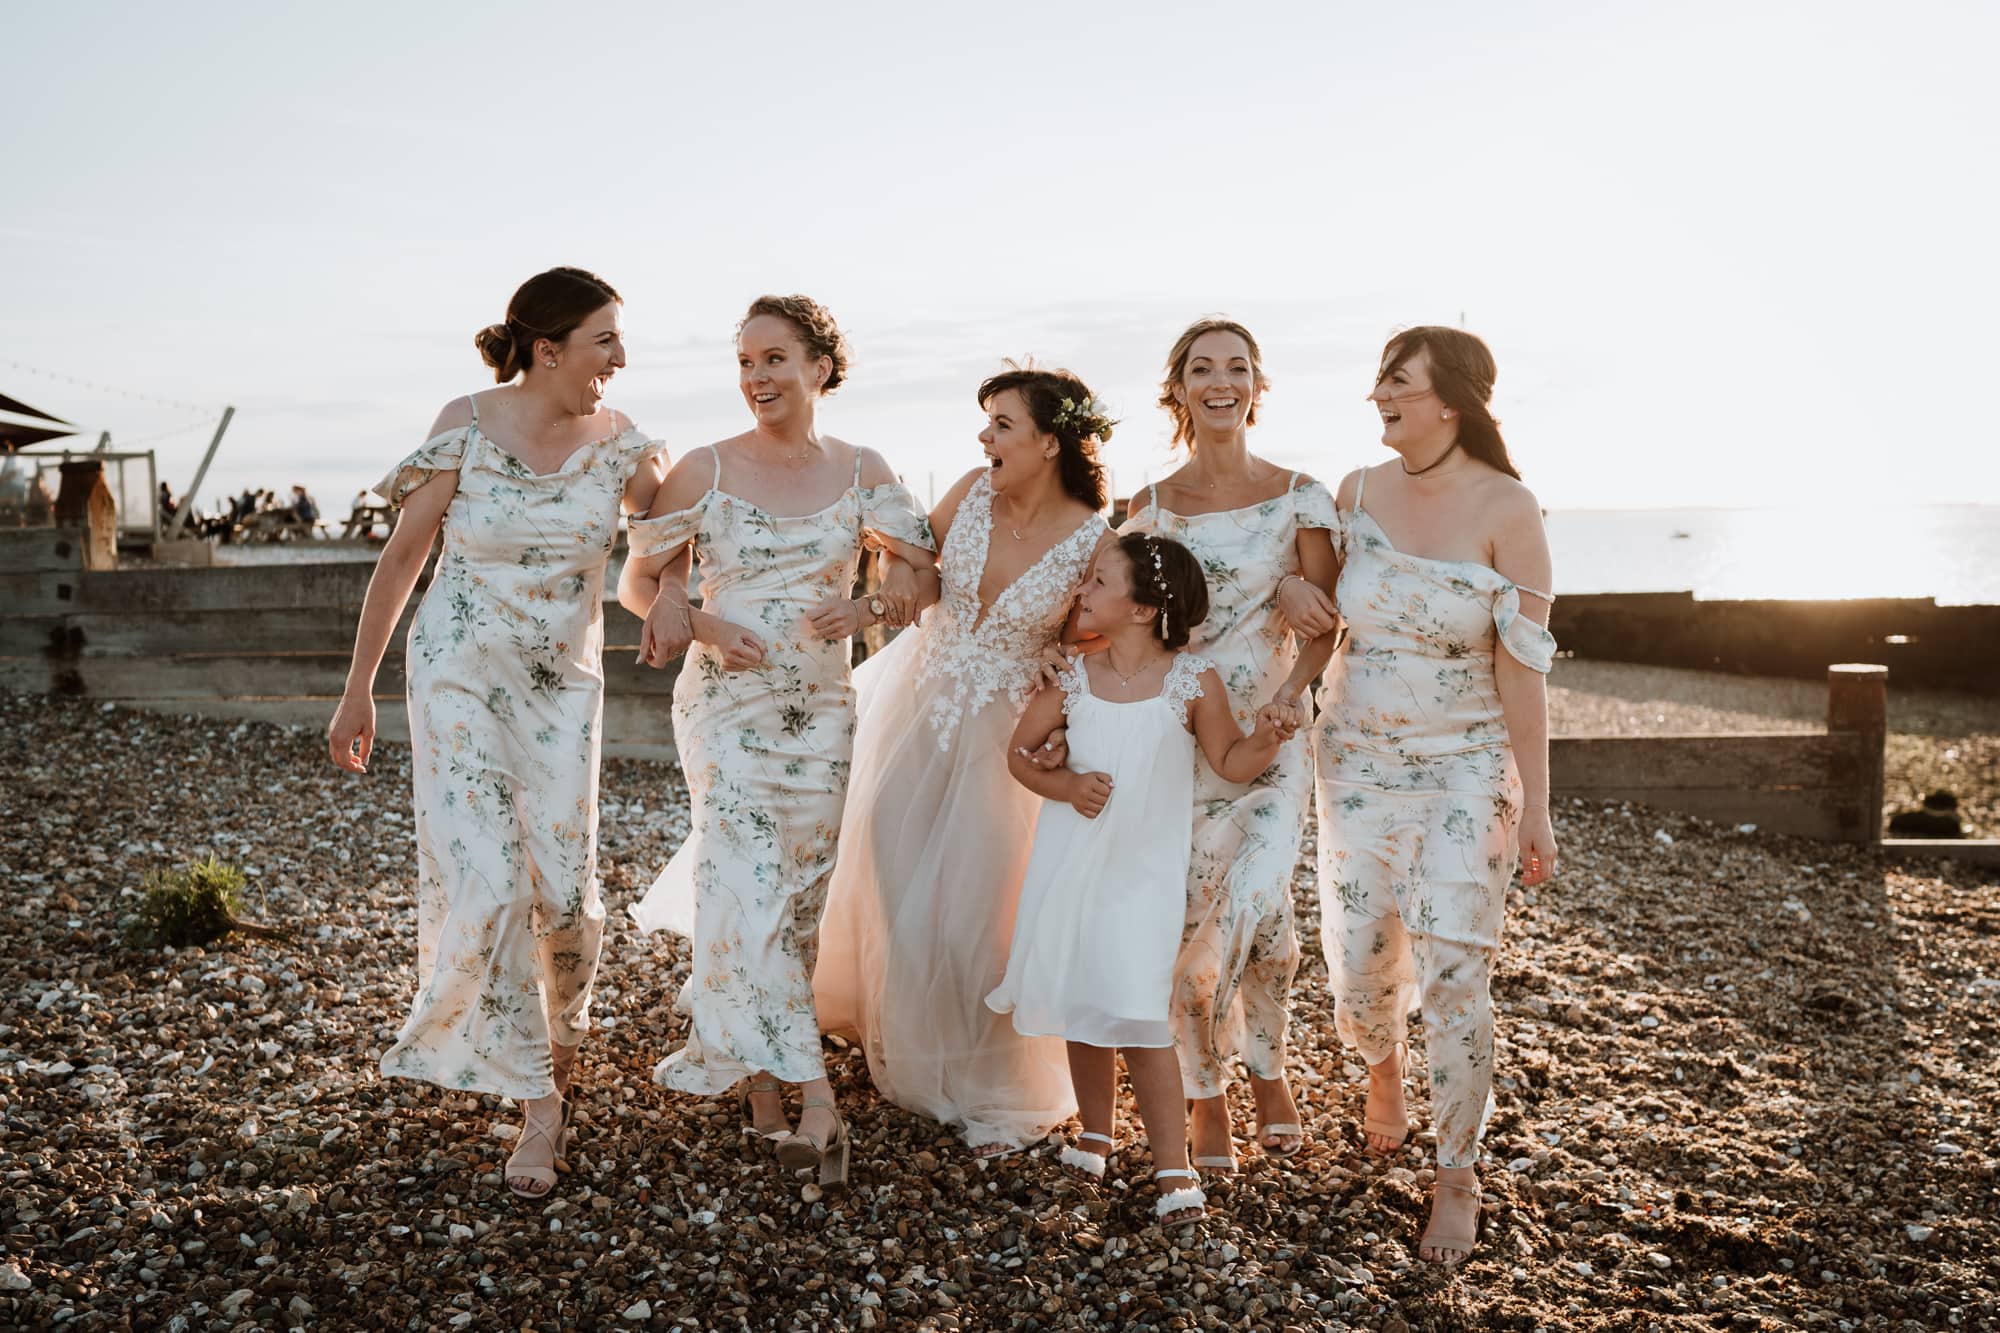 Bride and her bridesmaids laughing together arm in arm as they walk along Whitstable beach